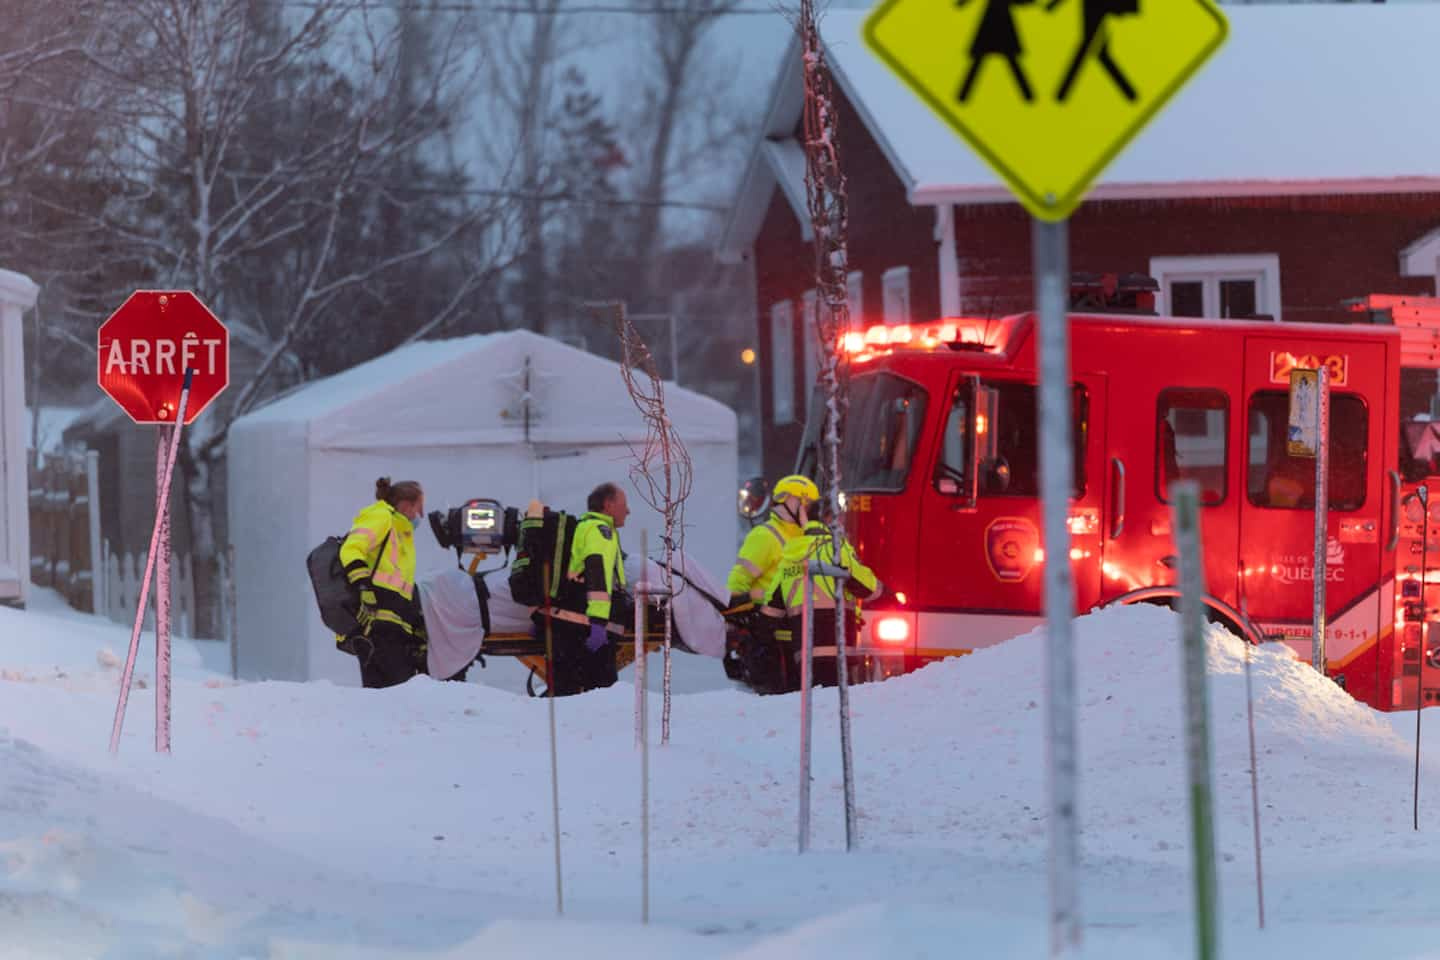 [PHOTOS] Quebec: a man died and a woman seriously injured in a fire